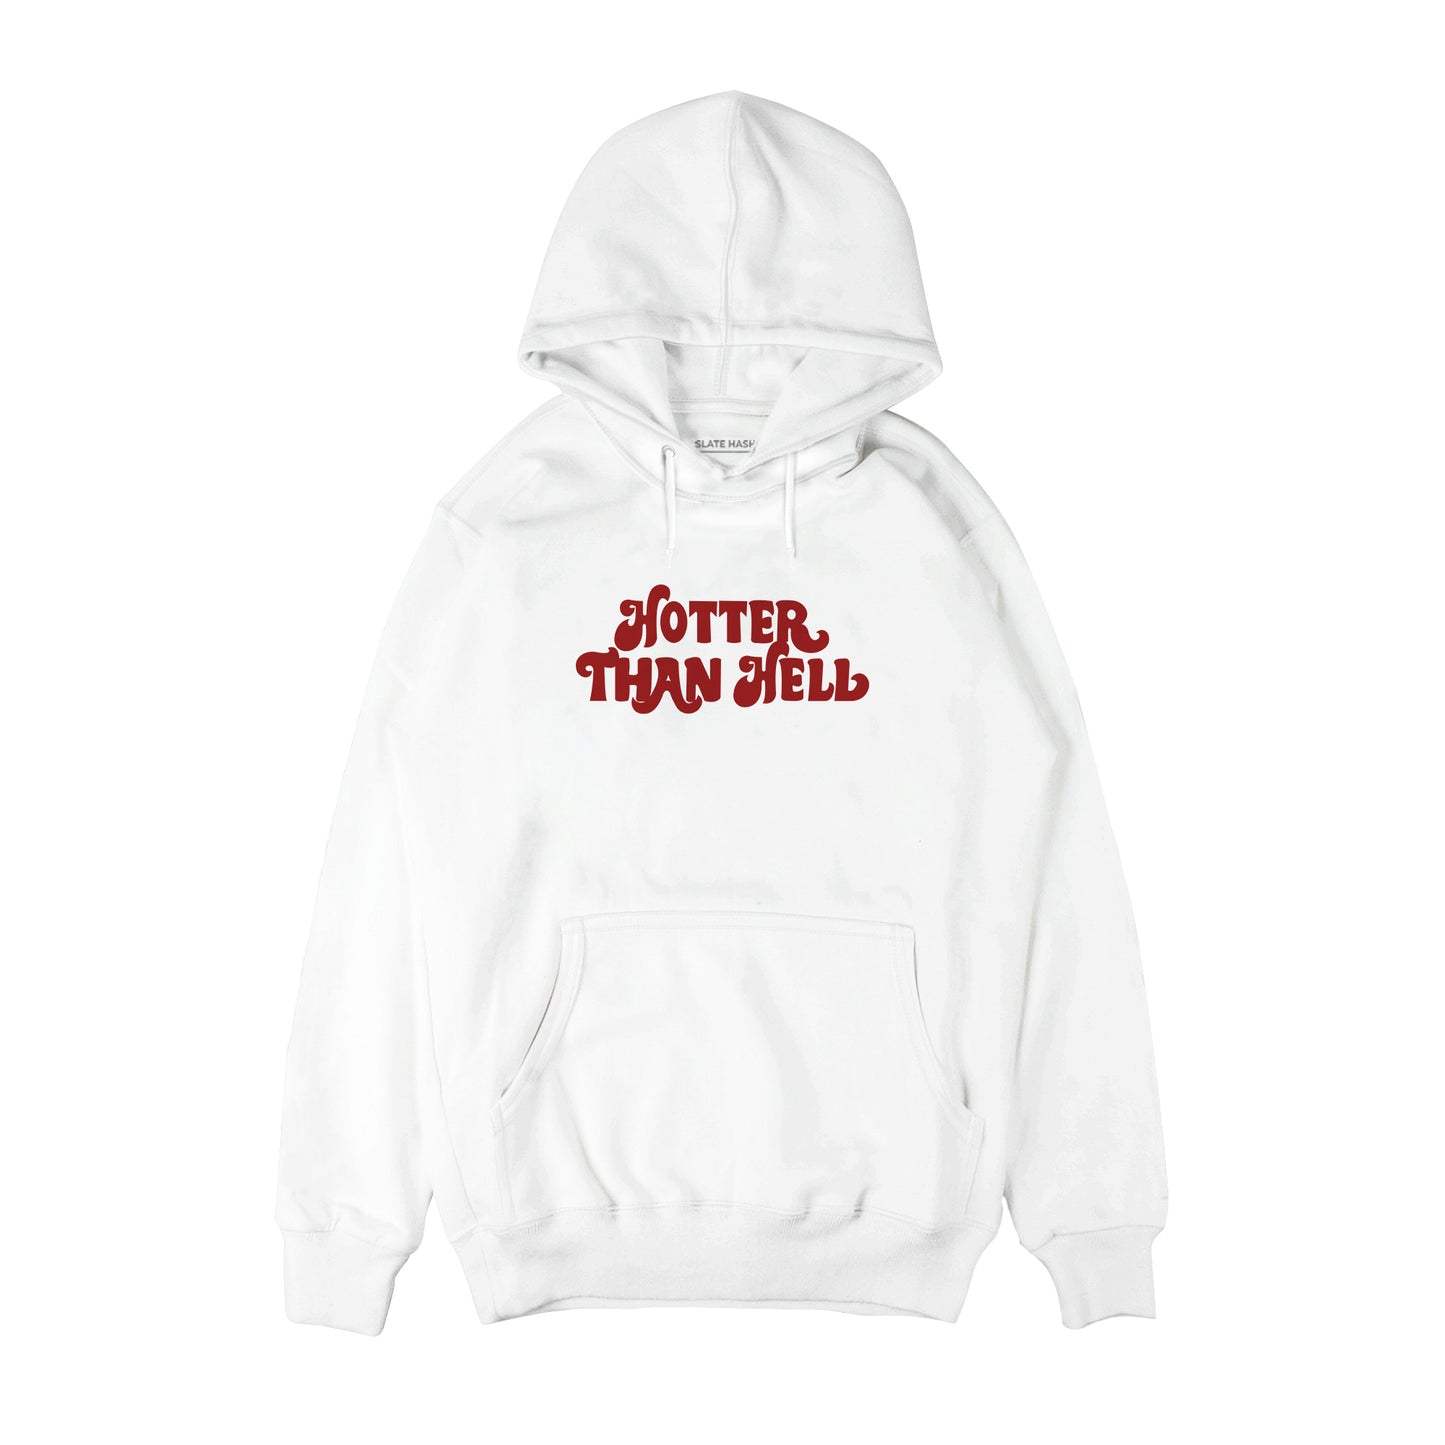 Hotter than hell Hoodie